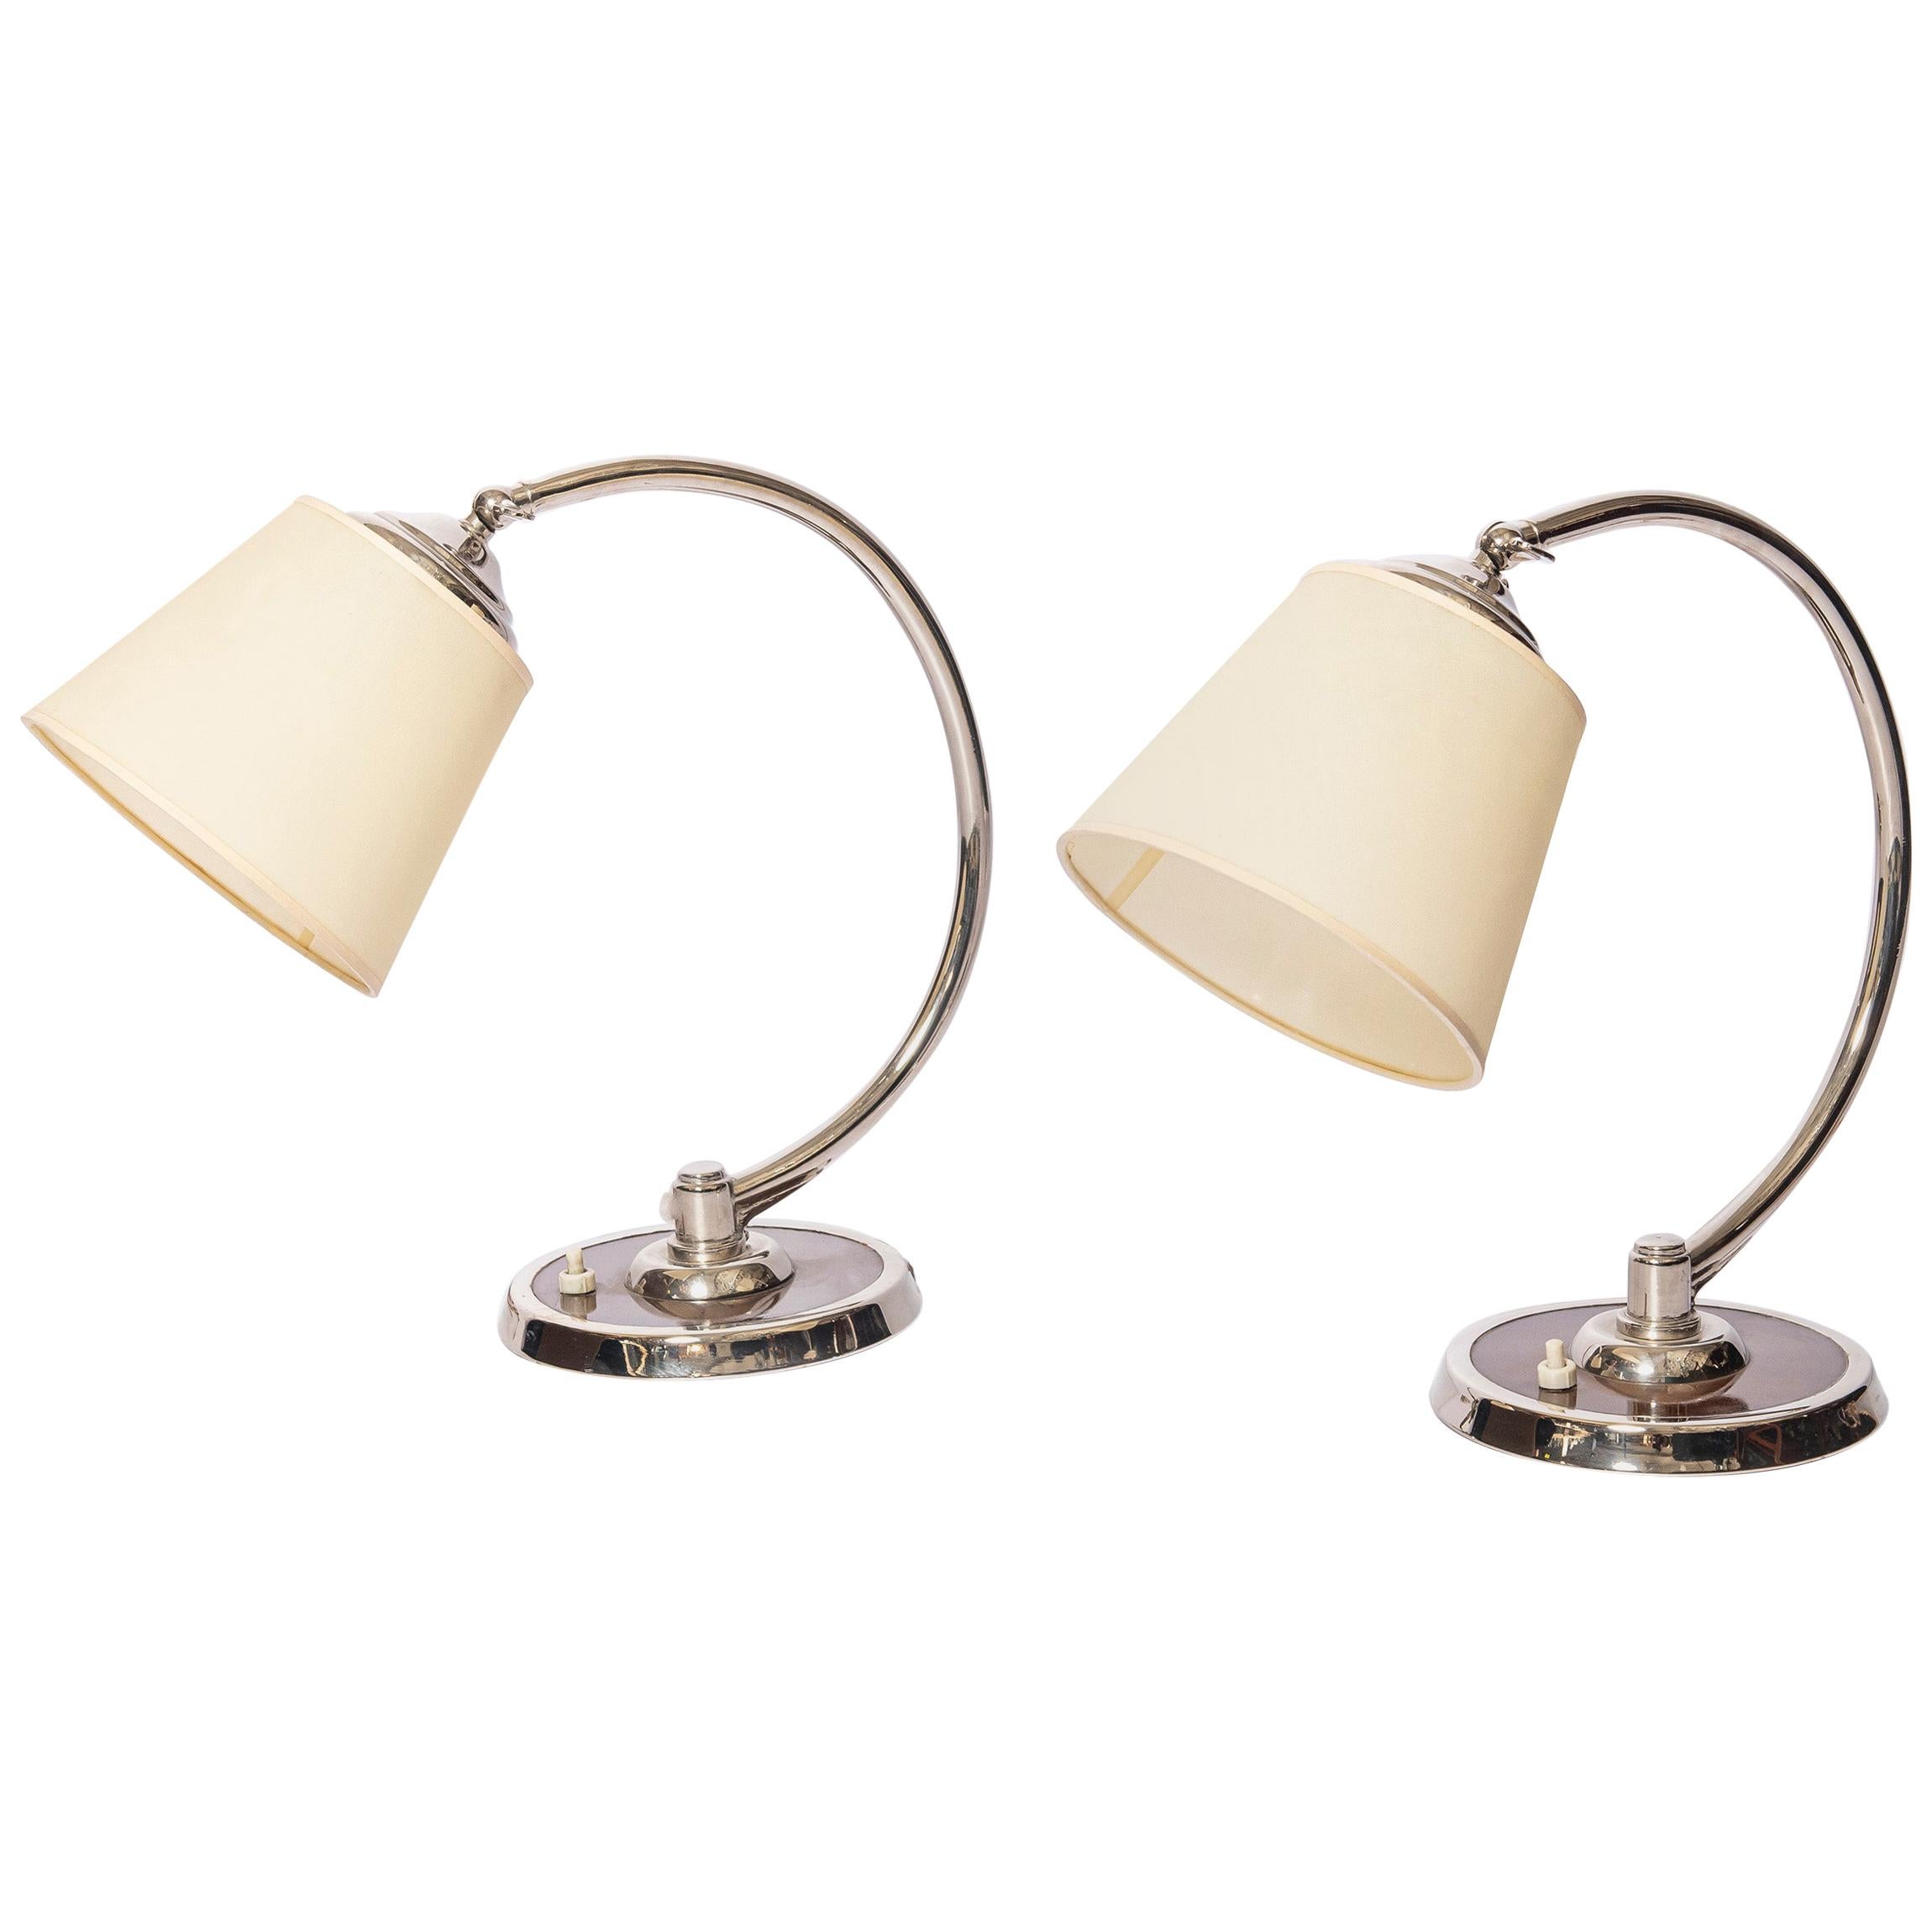 Pair of Chrome Metal and Wood Table Lamps by Casa Comte Buenos Aires, circa 1940 For Sale